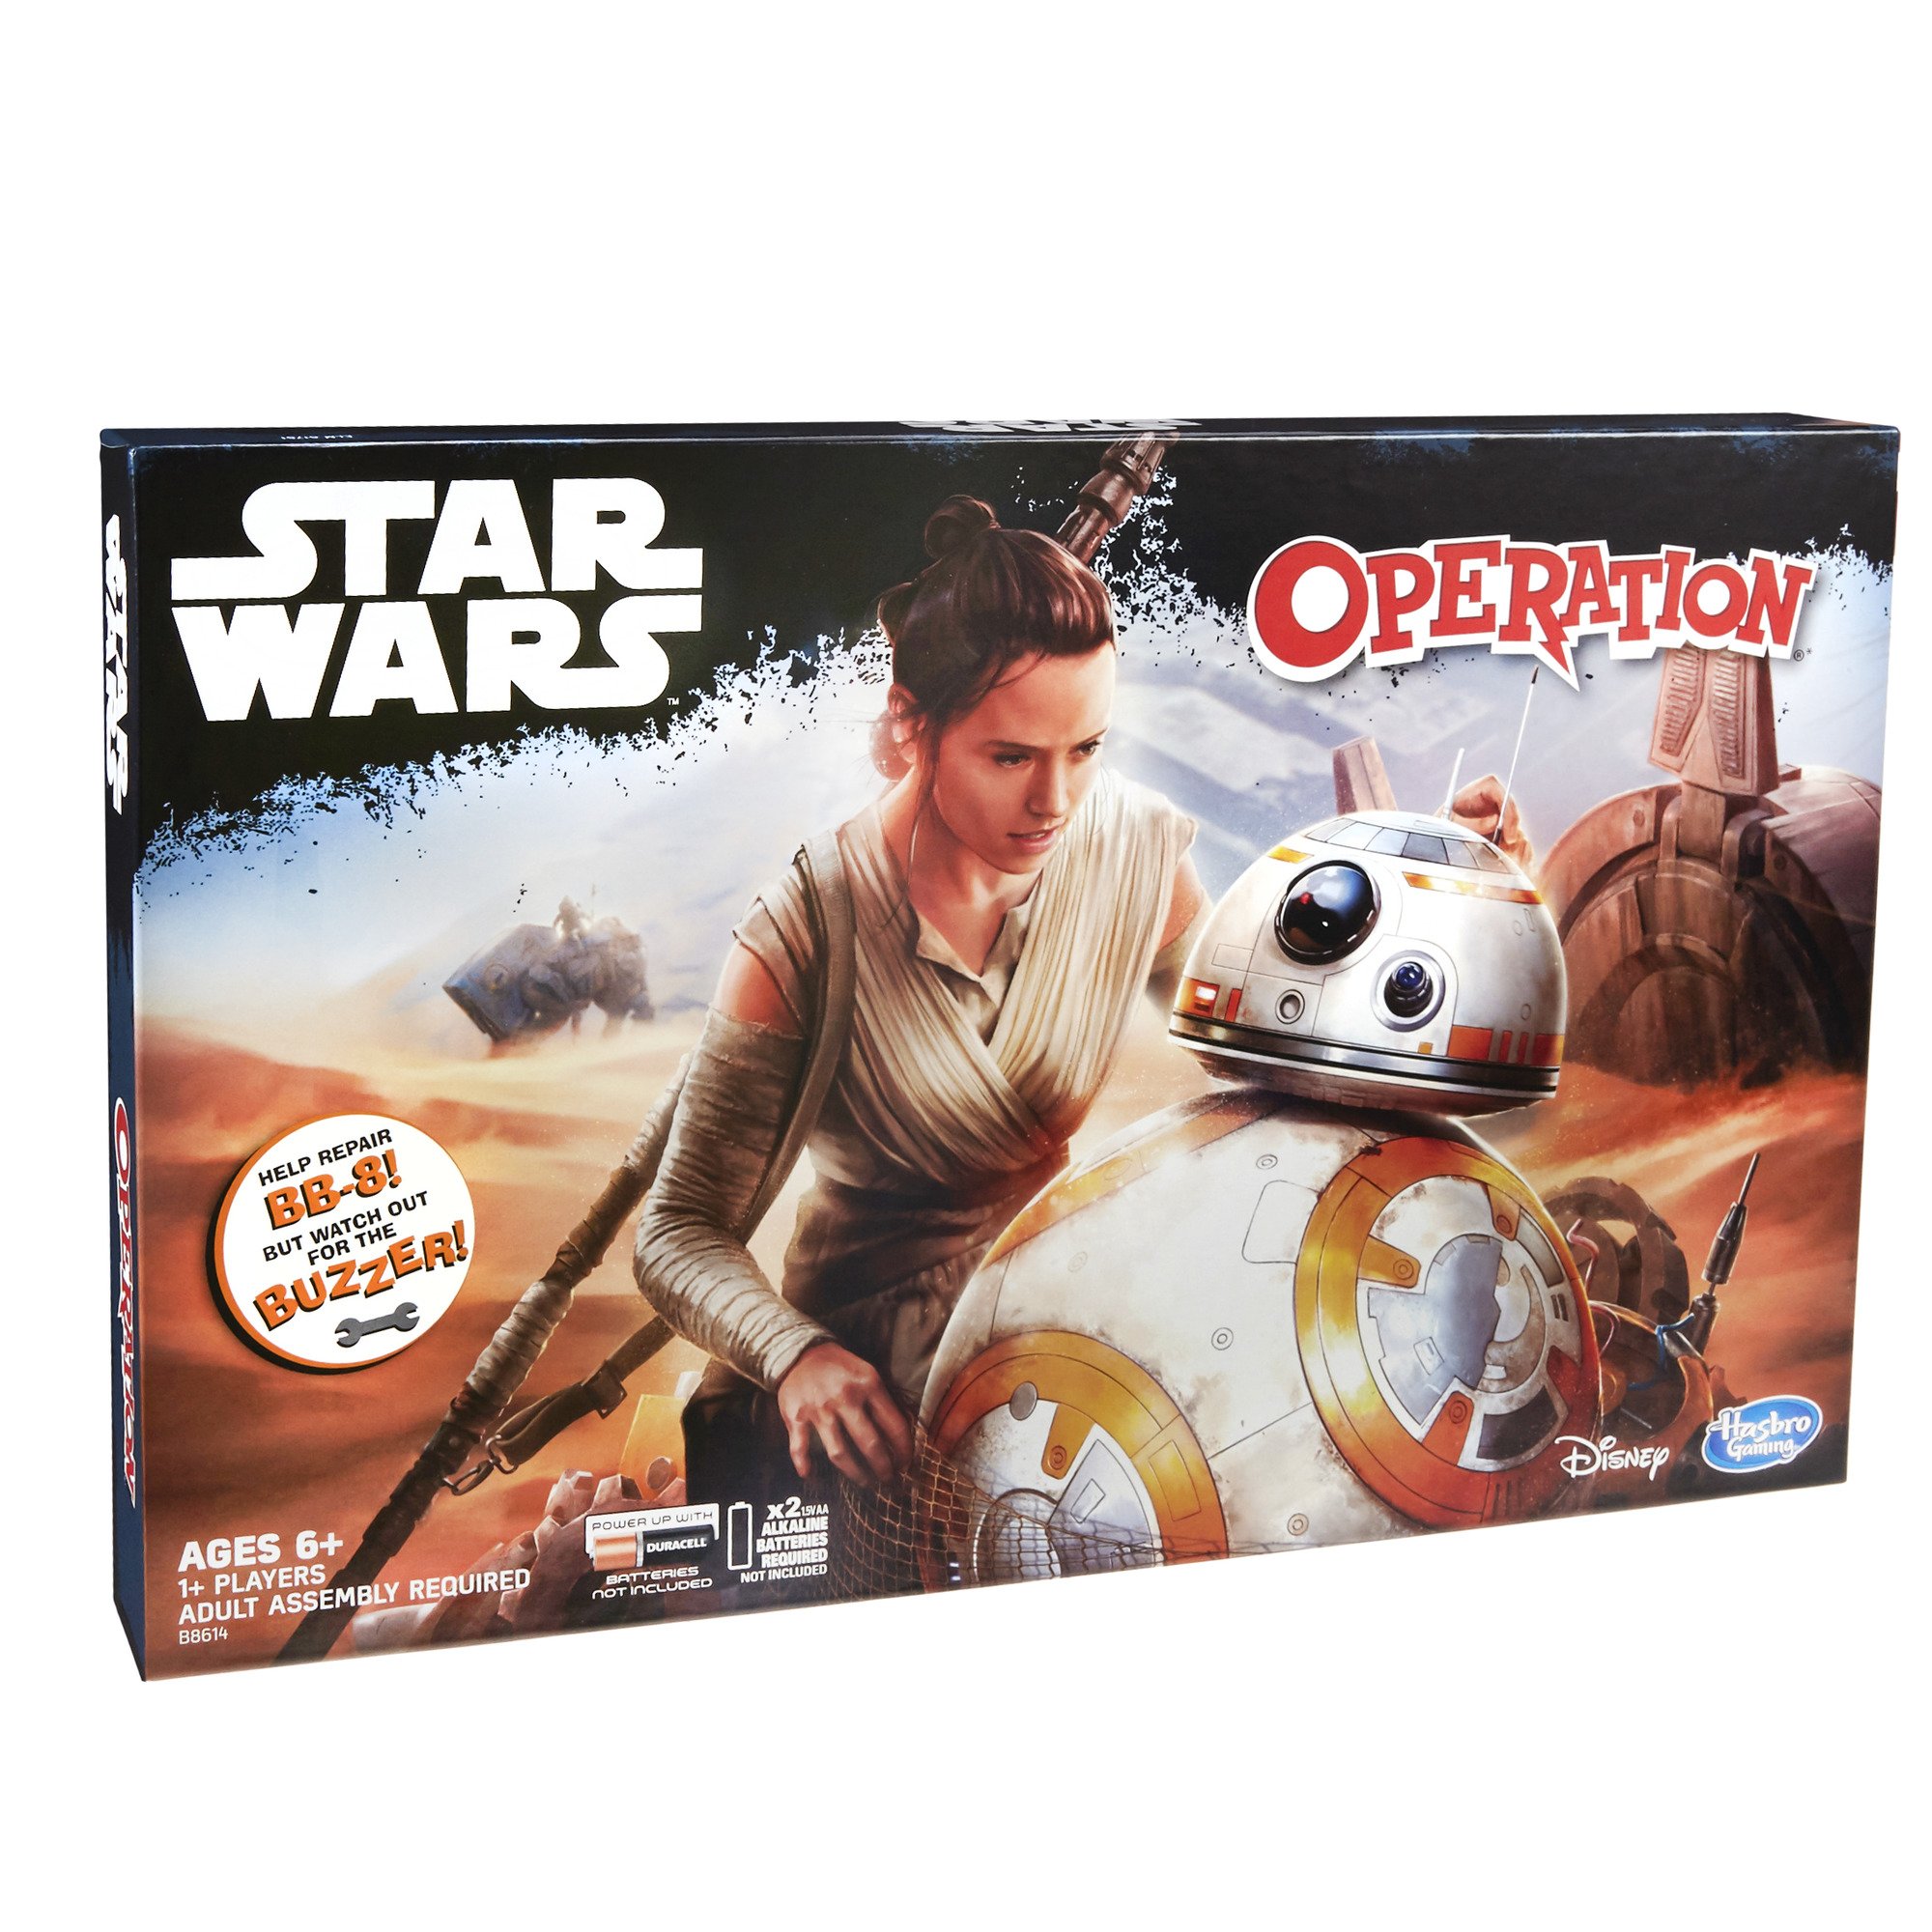 Hasbro Gaming Operation Game: Star Wars Edition for 72 months to 1188 months